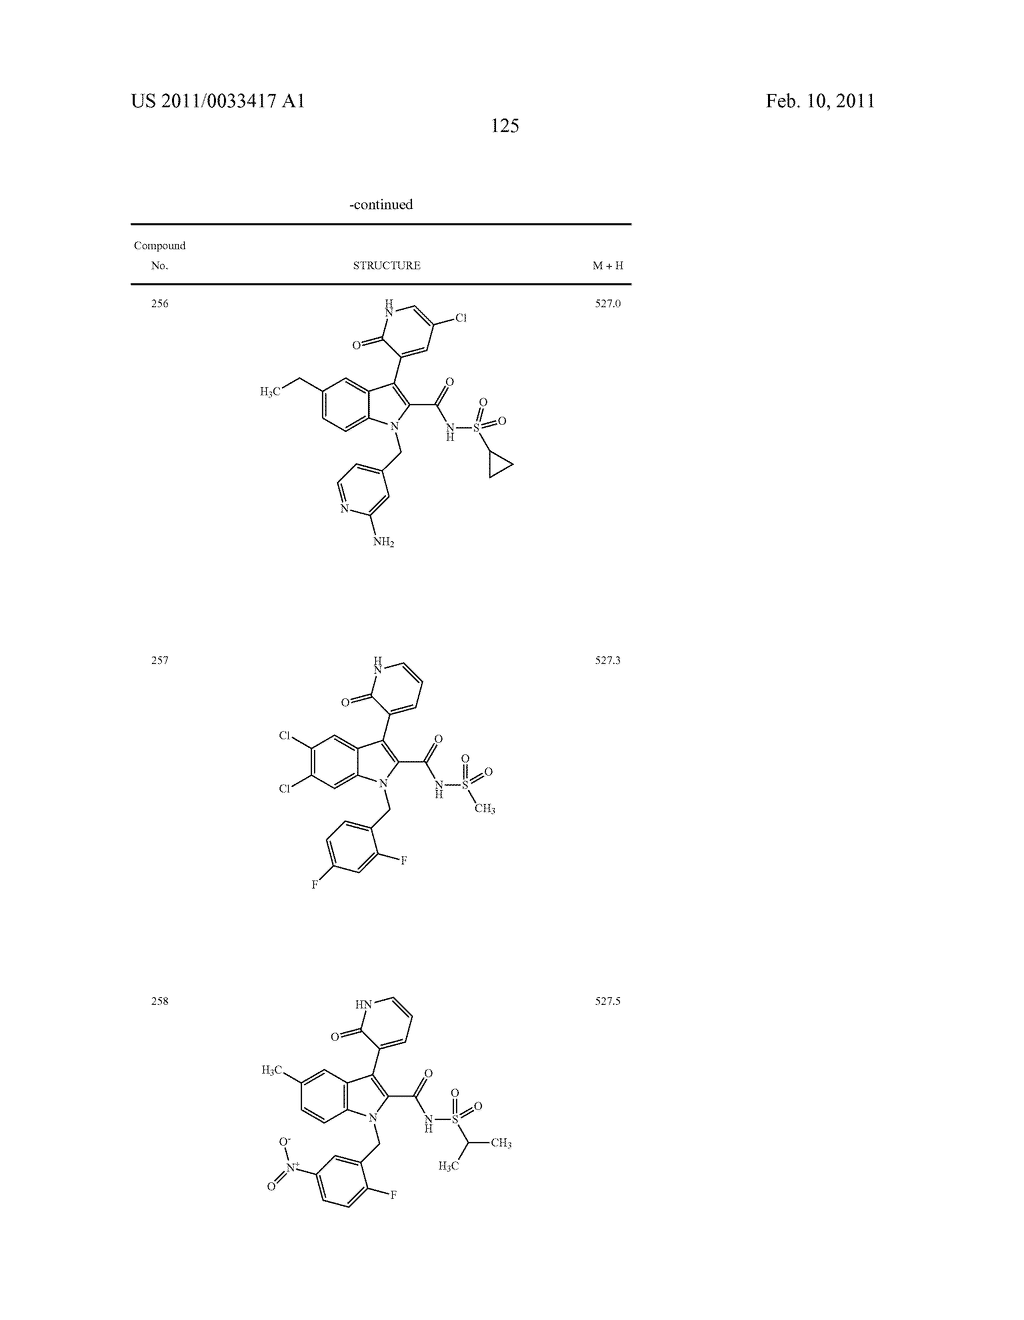 2,3-SUBSTITUTED INDOLE DERIVATIVES FOR TREATING VIRAL INFECTIONS - diagram, schematic, and image 126